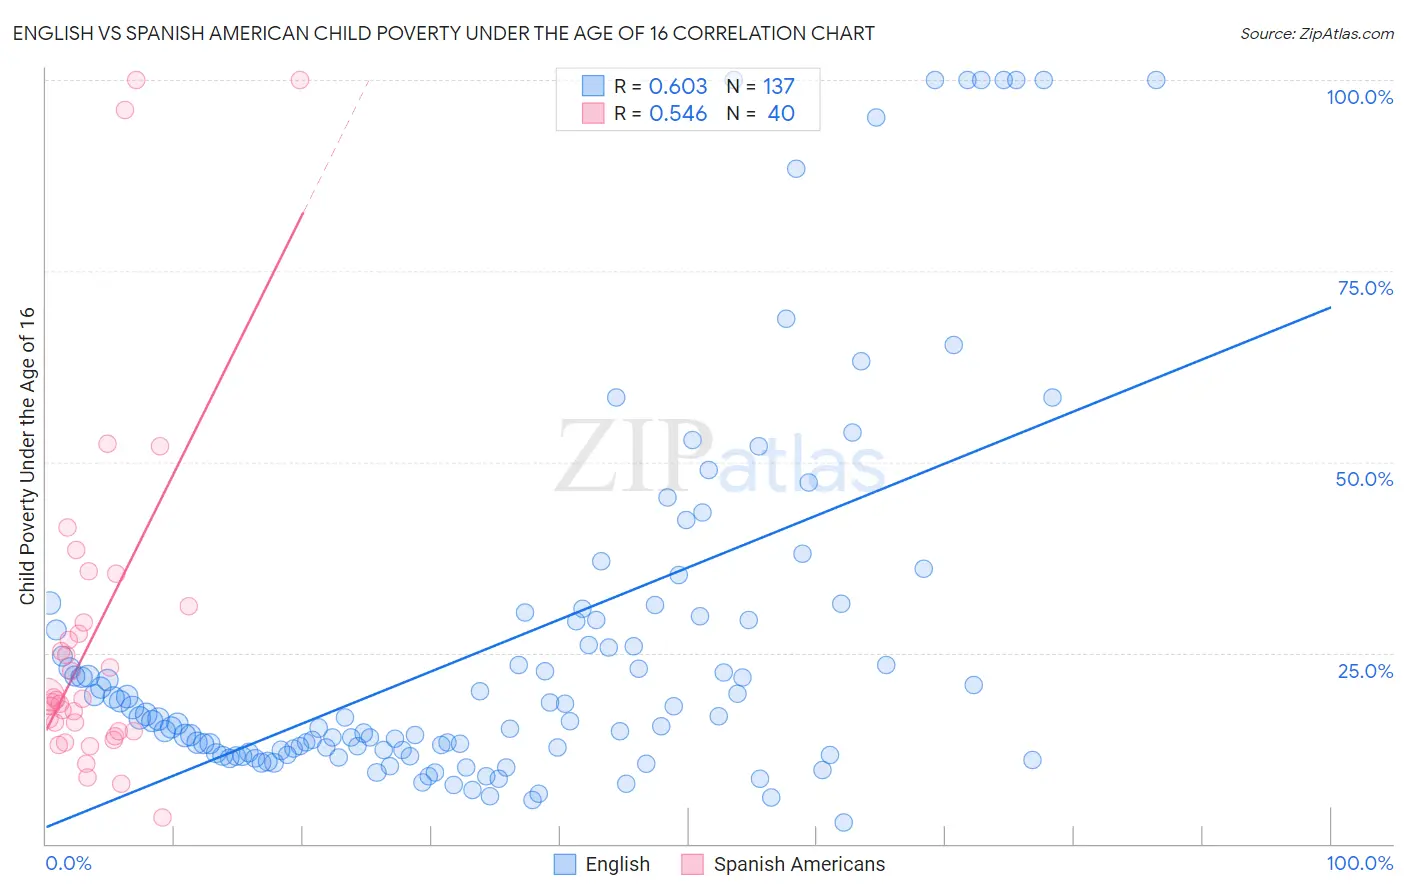 English vs Spanish American Child Poverty Under the Age of 16